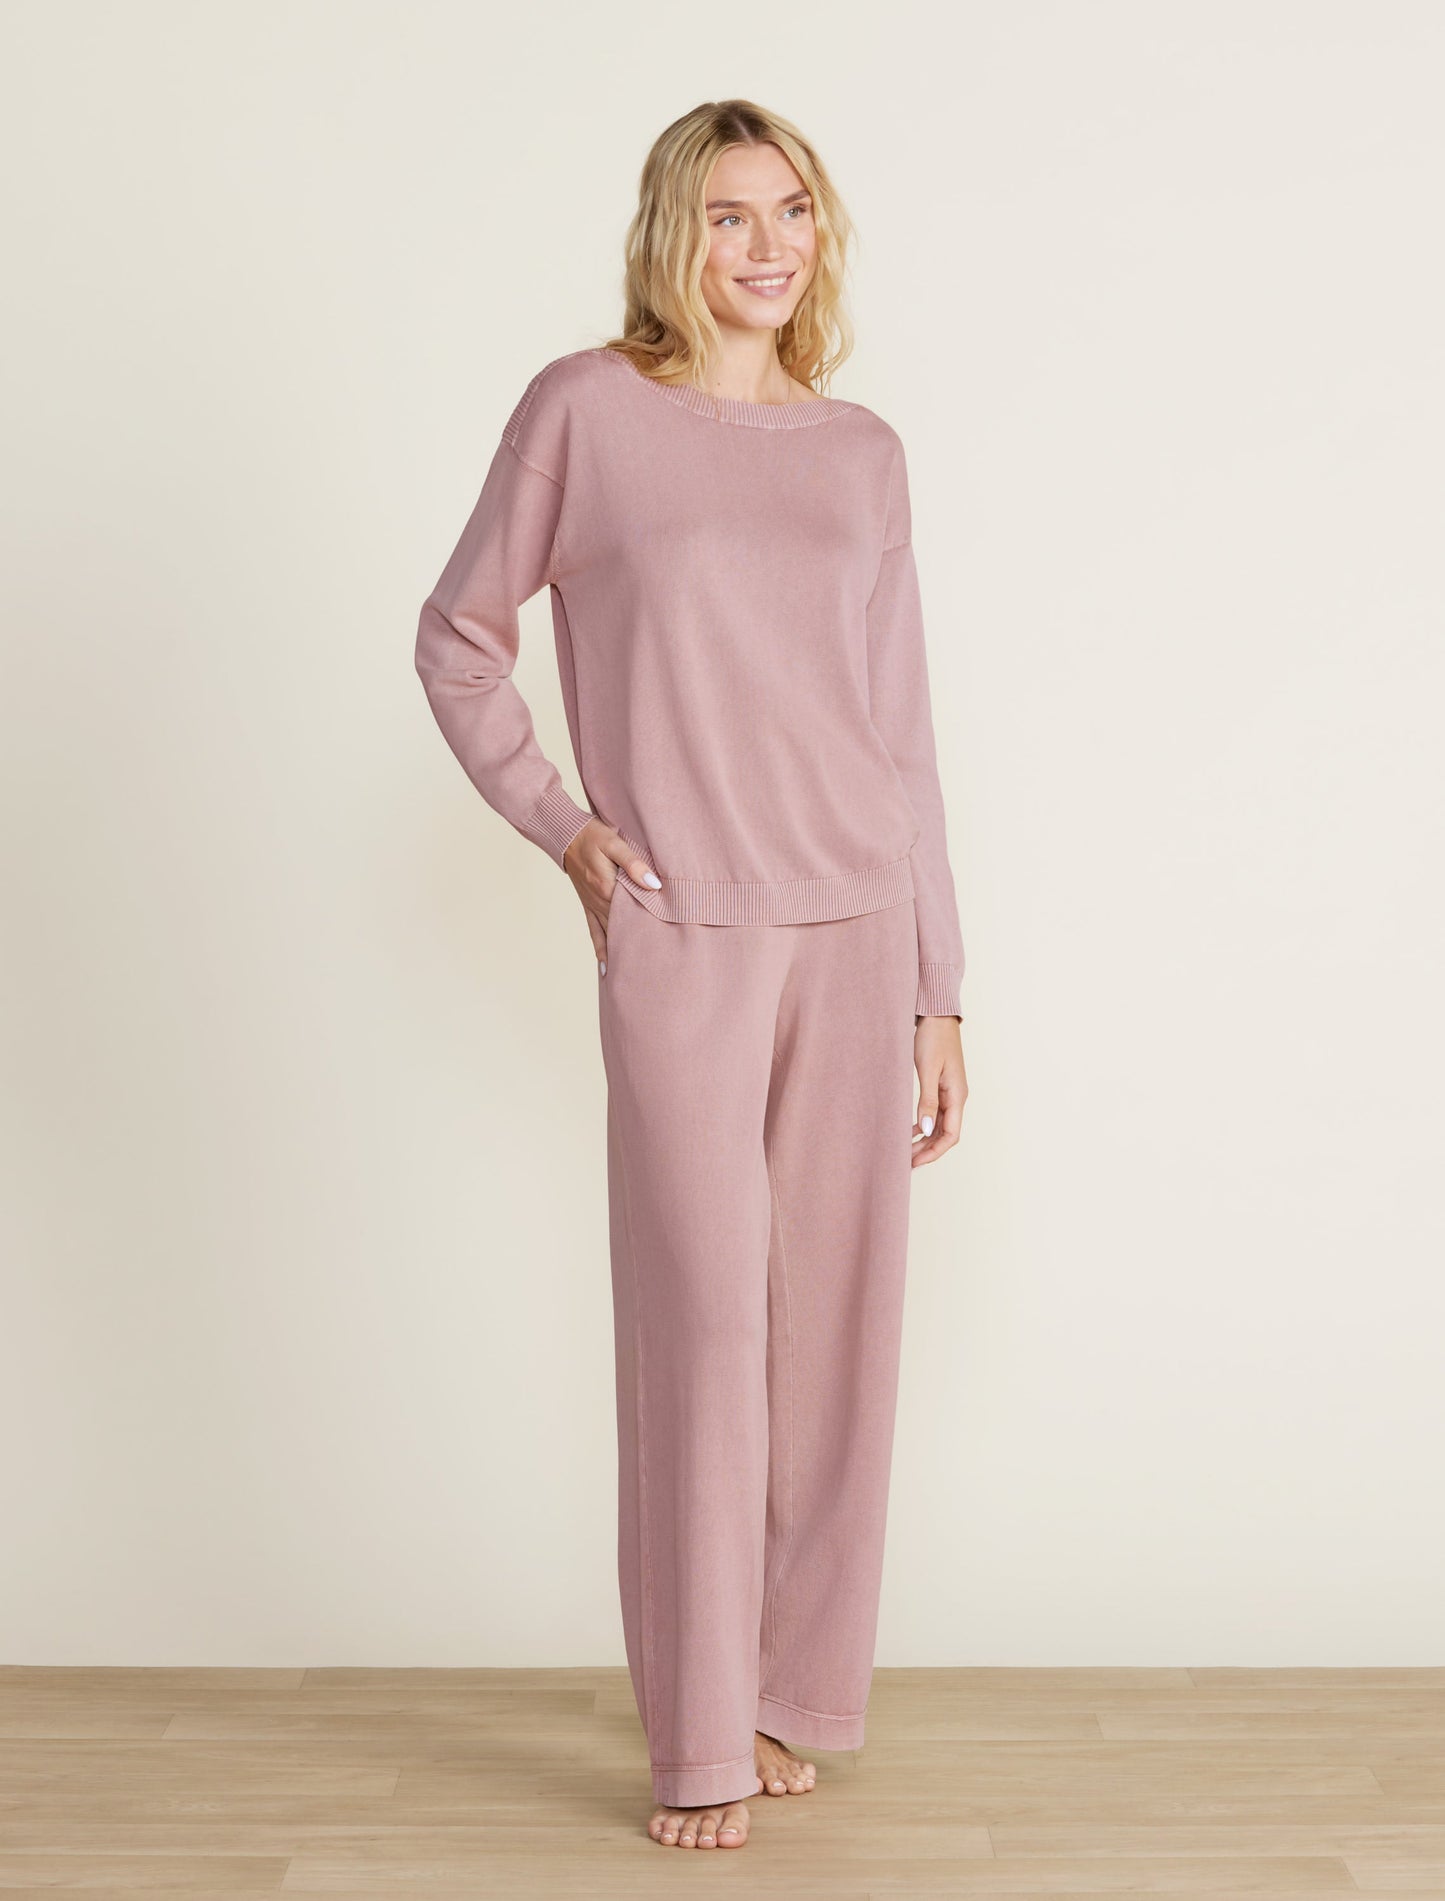 Barefoot Dreams Sunbleached Boatneck Pullover-Teaberry